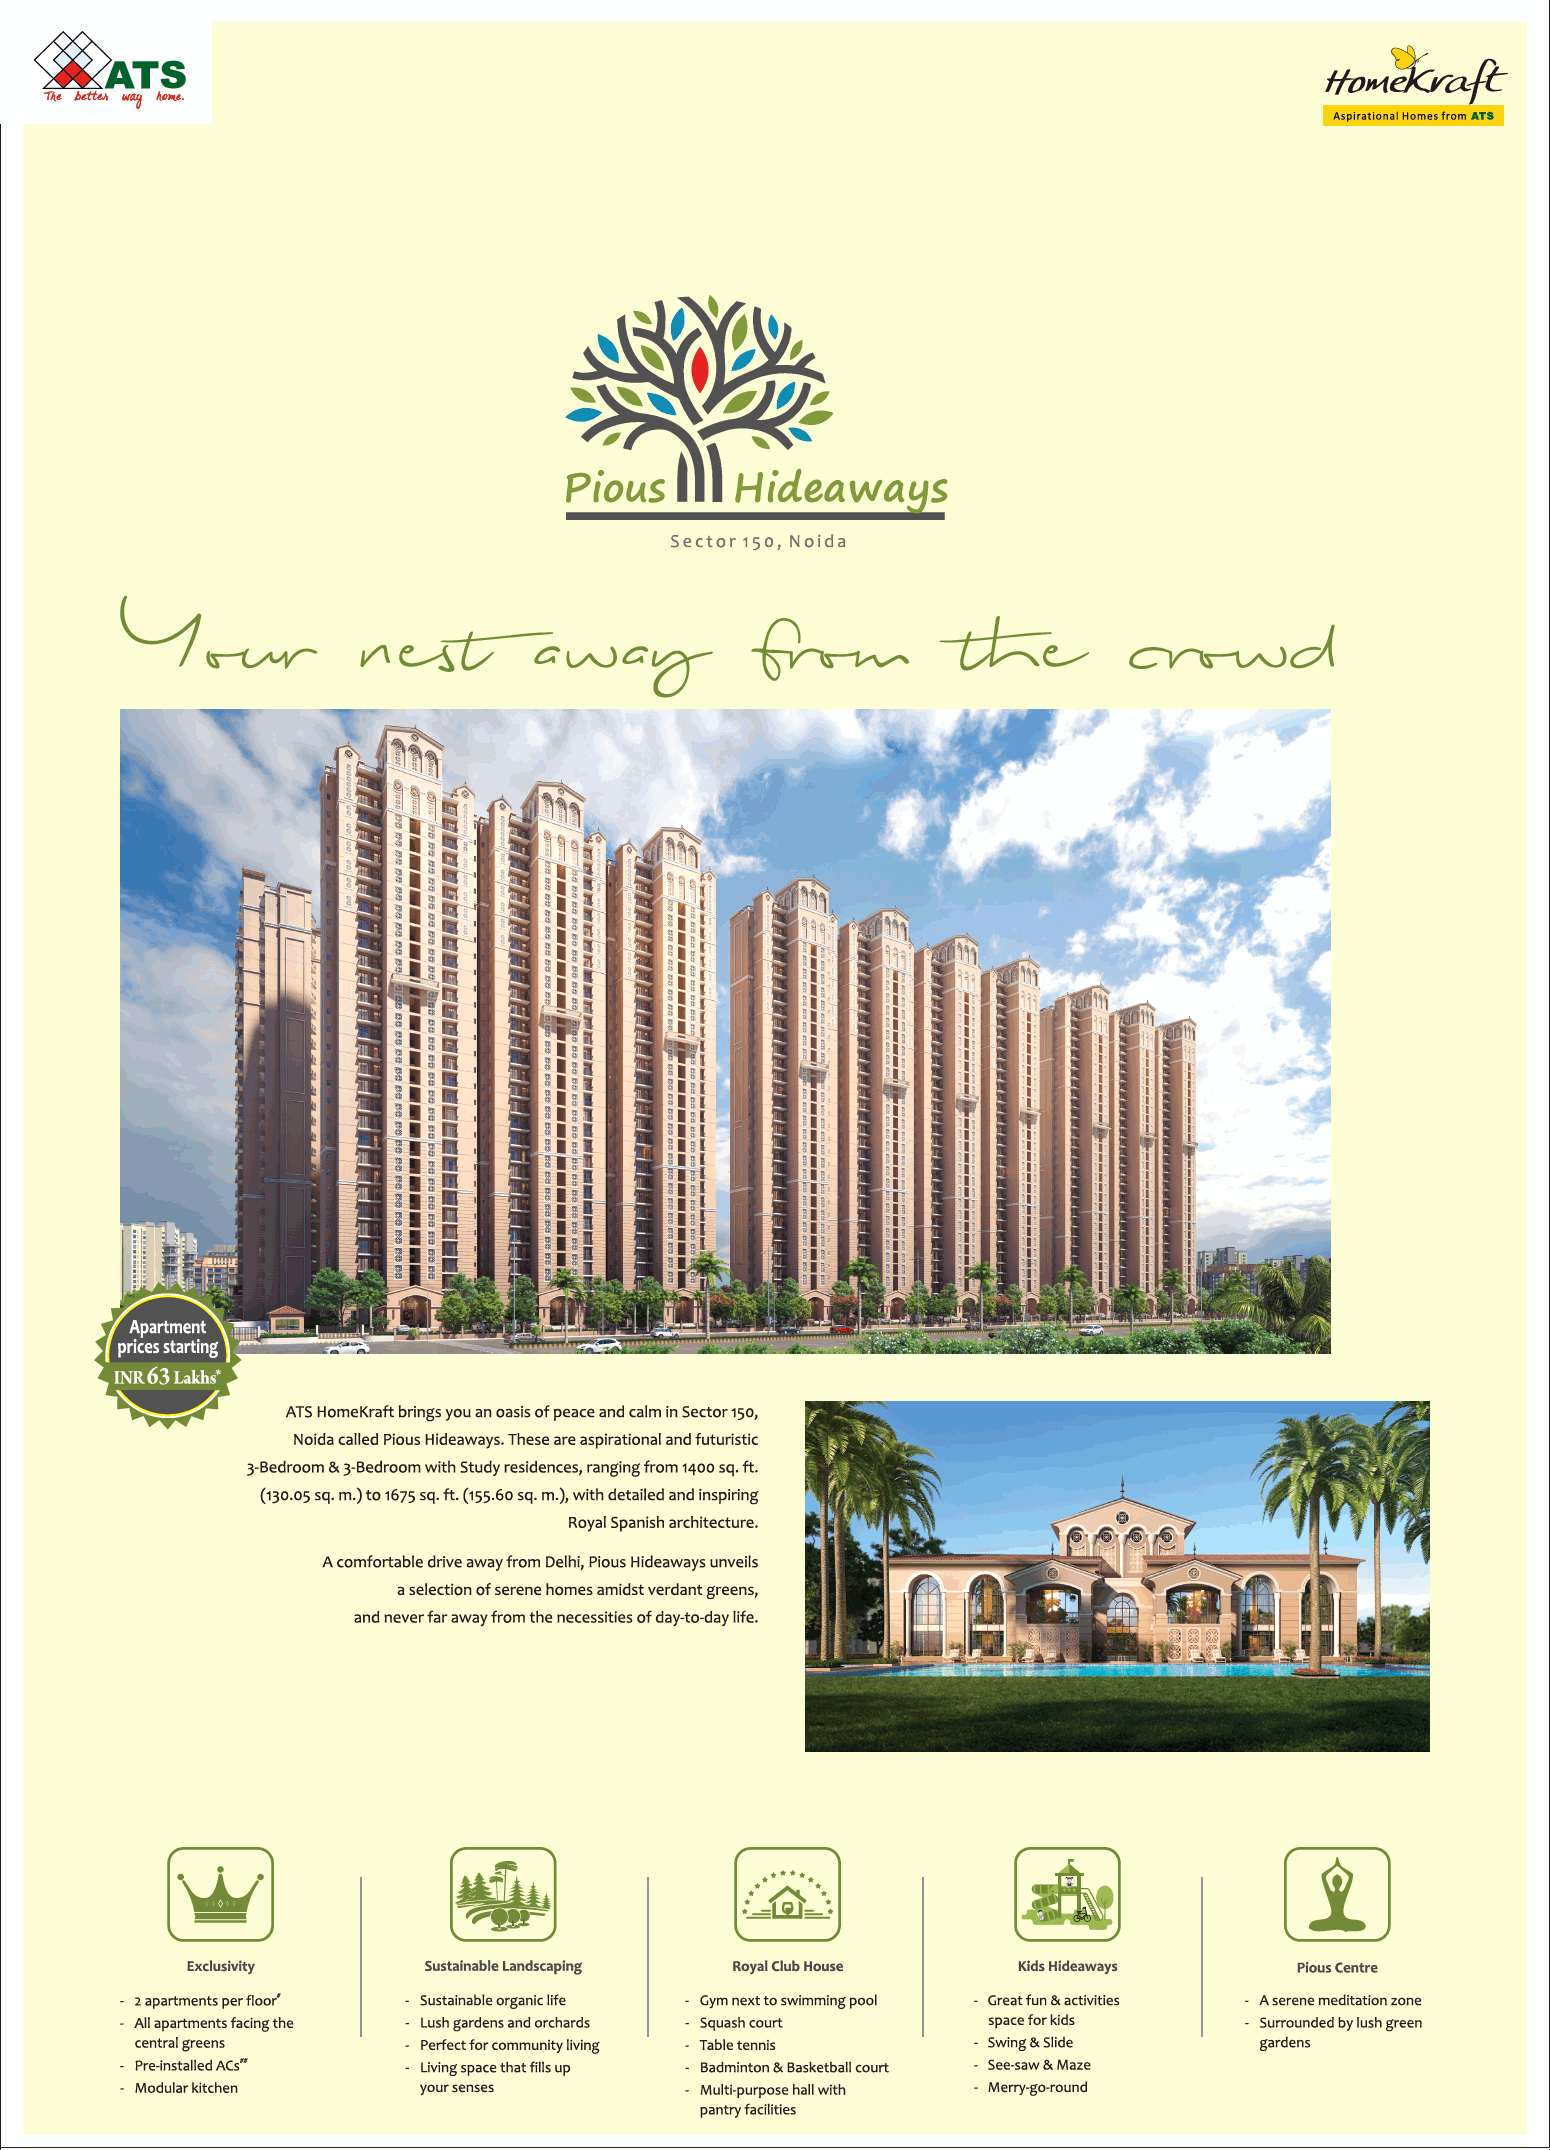 Presenting apartments with its exclusivity at ATS Pious Hideaways in Sector 150, Noida Update